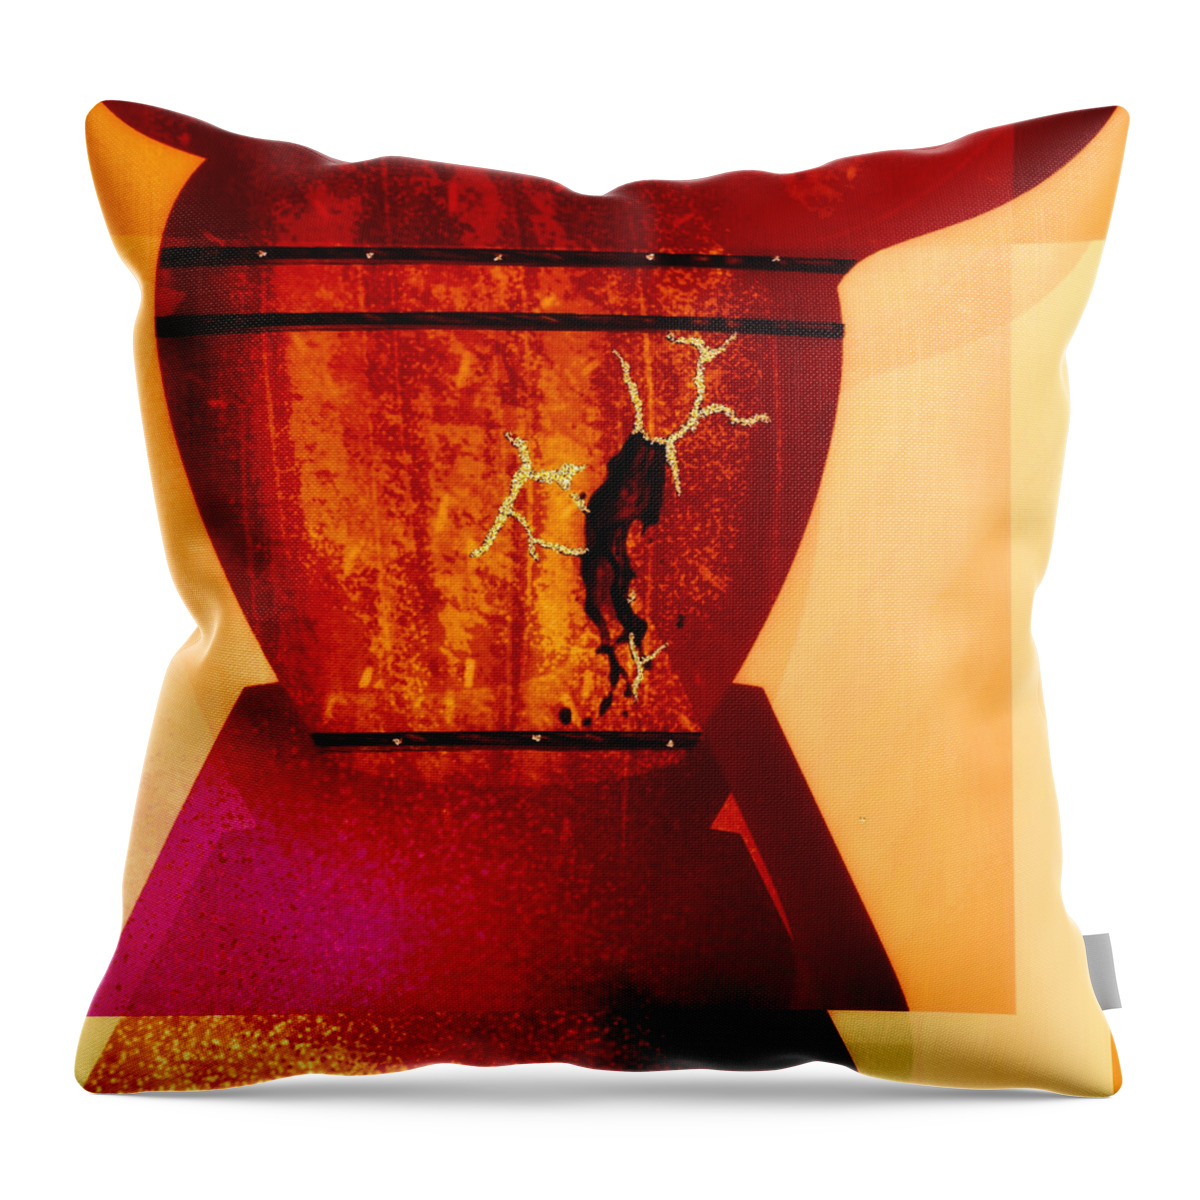 Abstract Art Throw Pillow featuring the digital art Kintsugi by Canessa Thomas